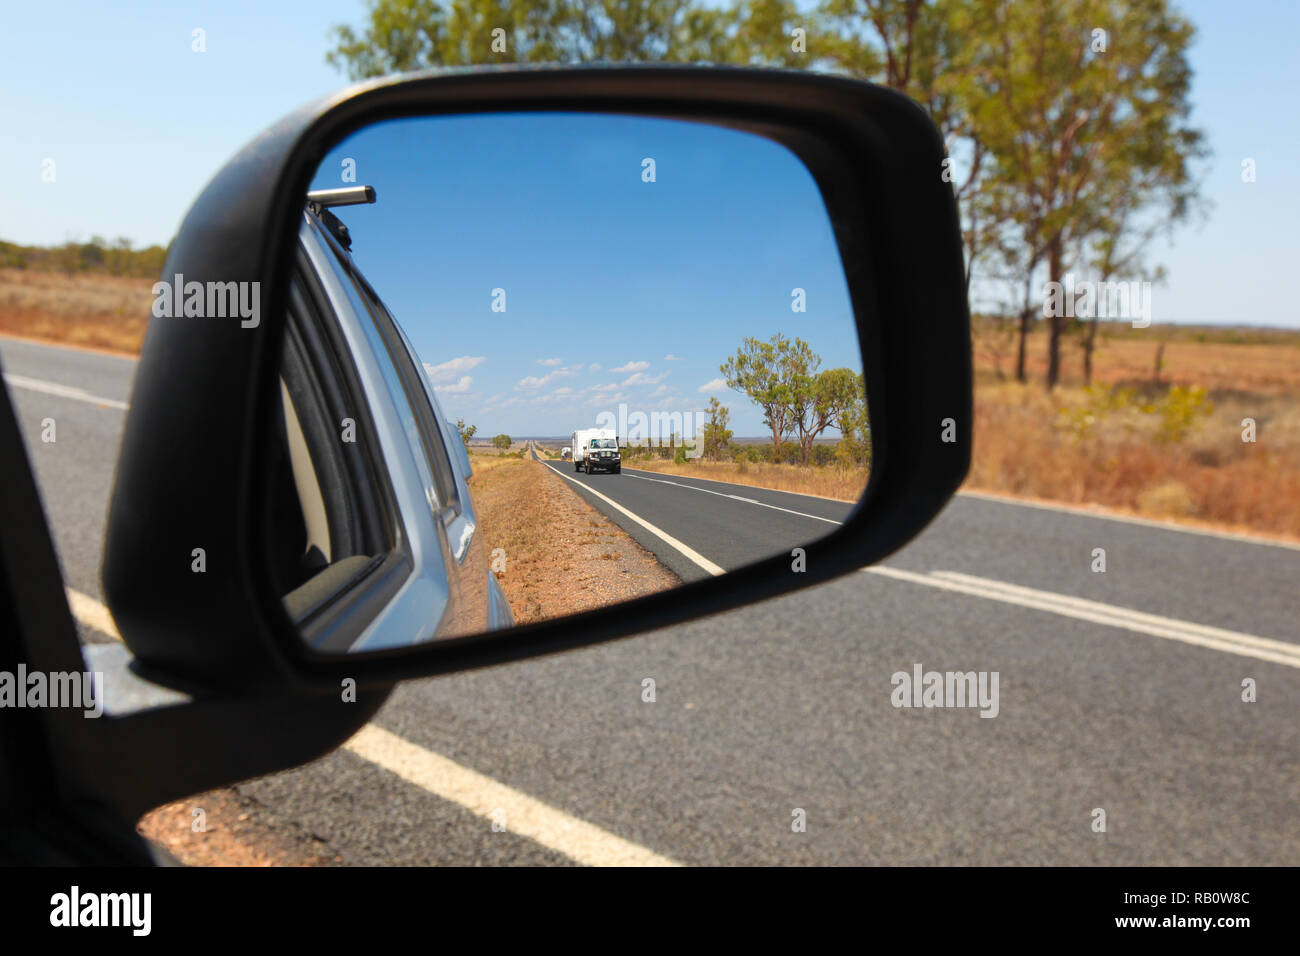 View in the side mirror on the Carnarvon Highway in Central Queensland Australia. 4WD vehicle towing caravan and outback Australian landscape Stock Photo